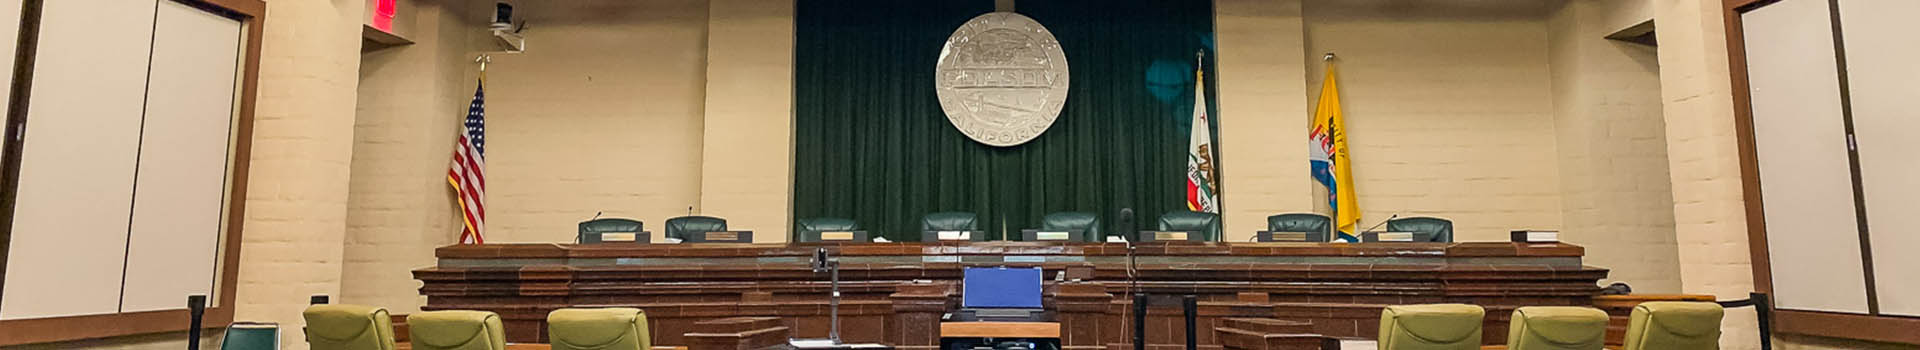 Clerk Home Banner of empty council chambers with light and dark green leather chairs, Folsom emblem hanging, American Flag, California Flag, and Folsom Flag